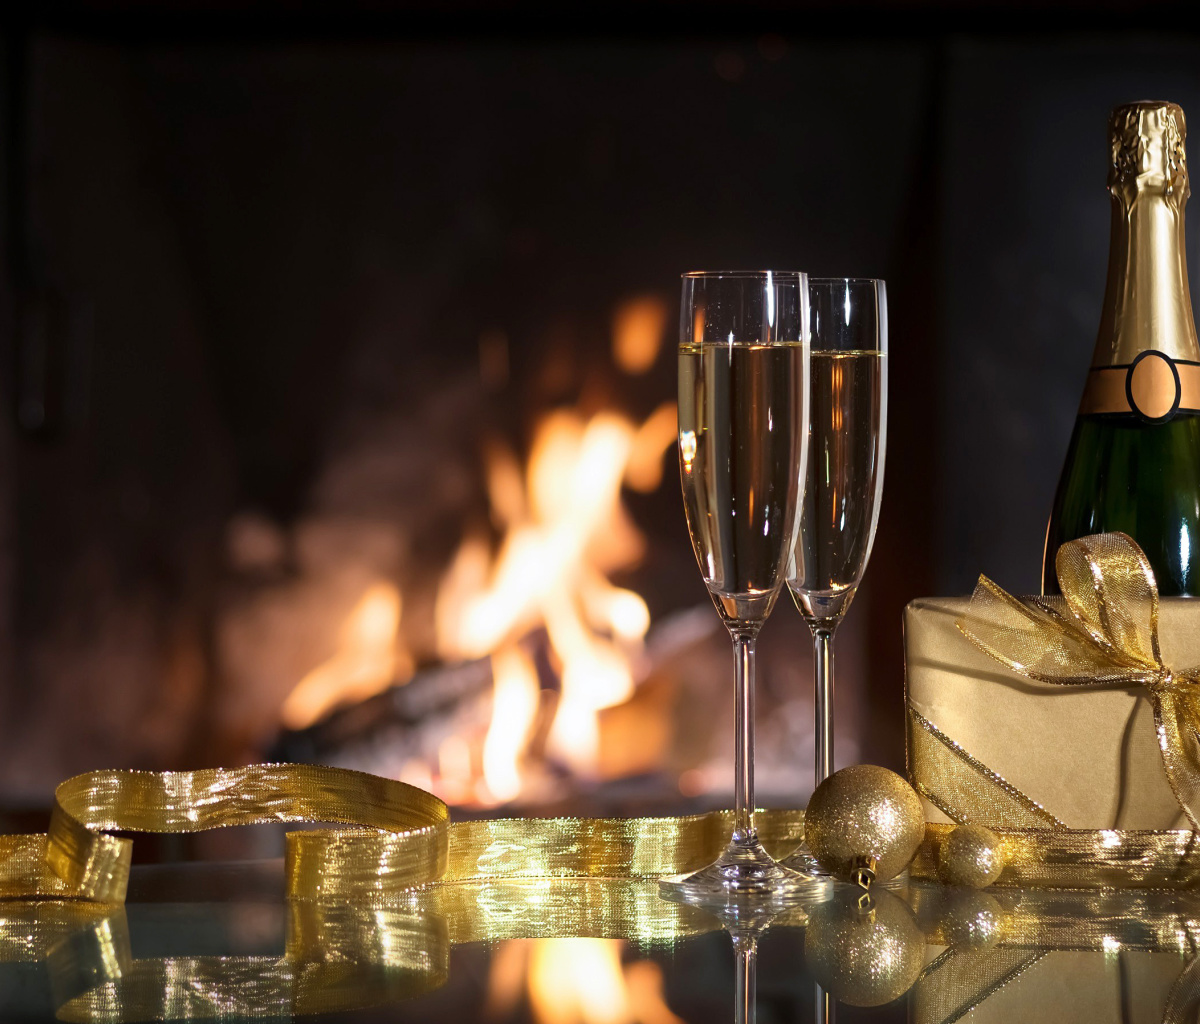 Champagne and Fireplace wallpaper 1200x1024